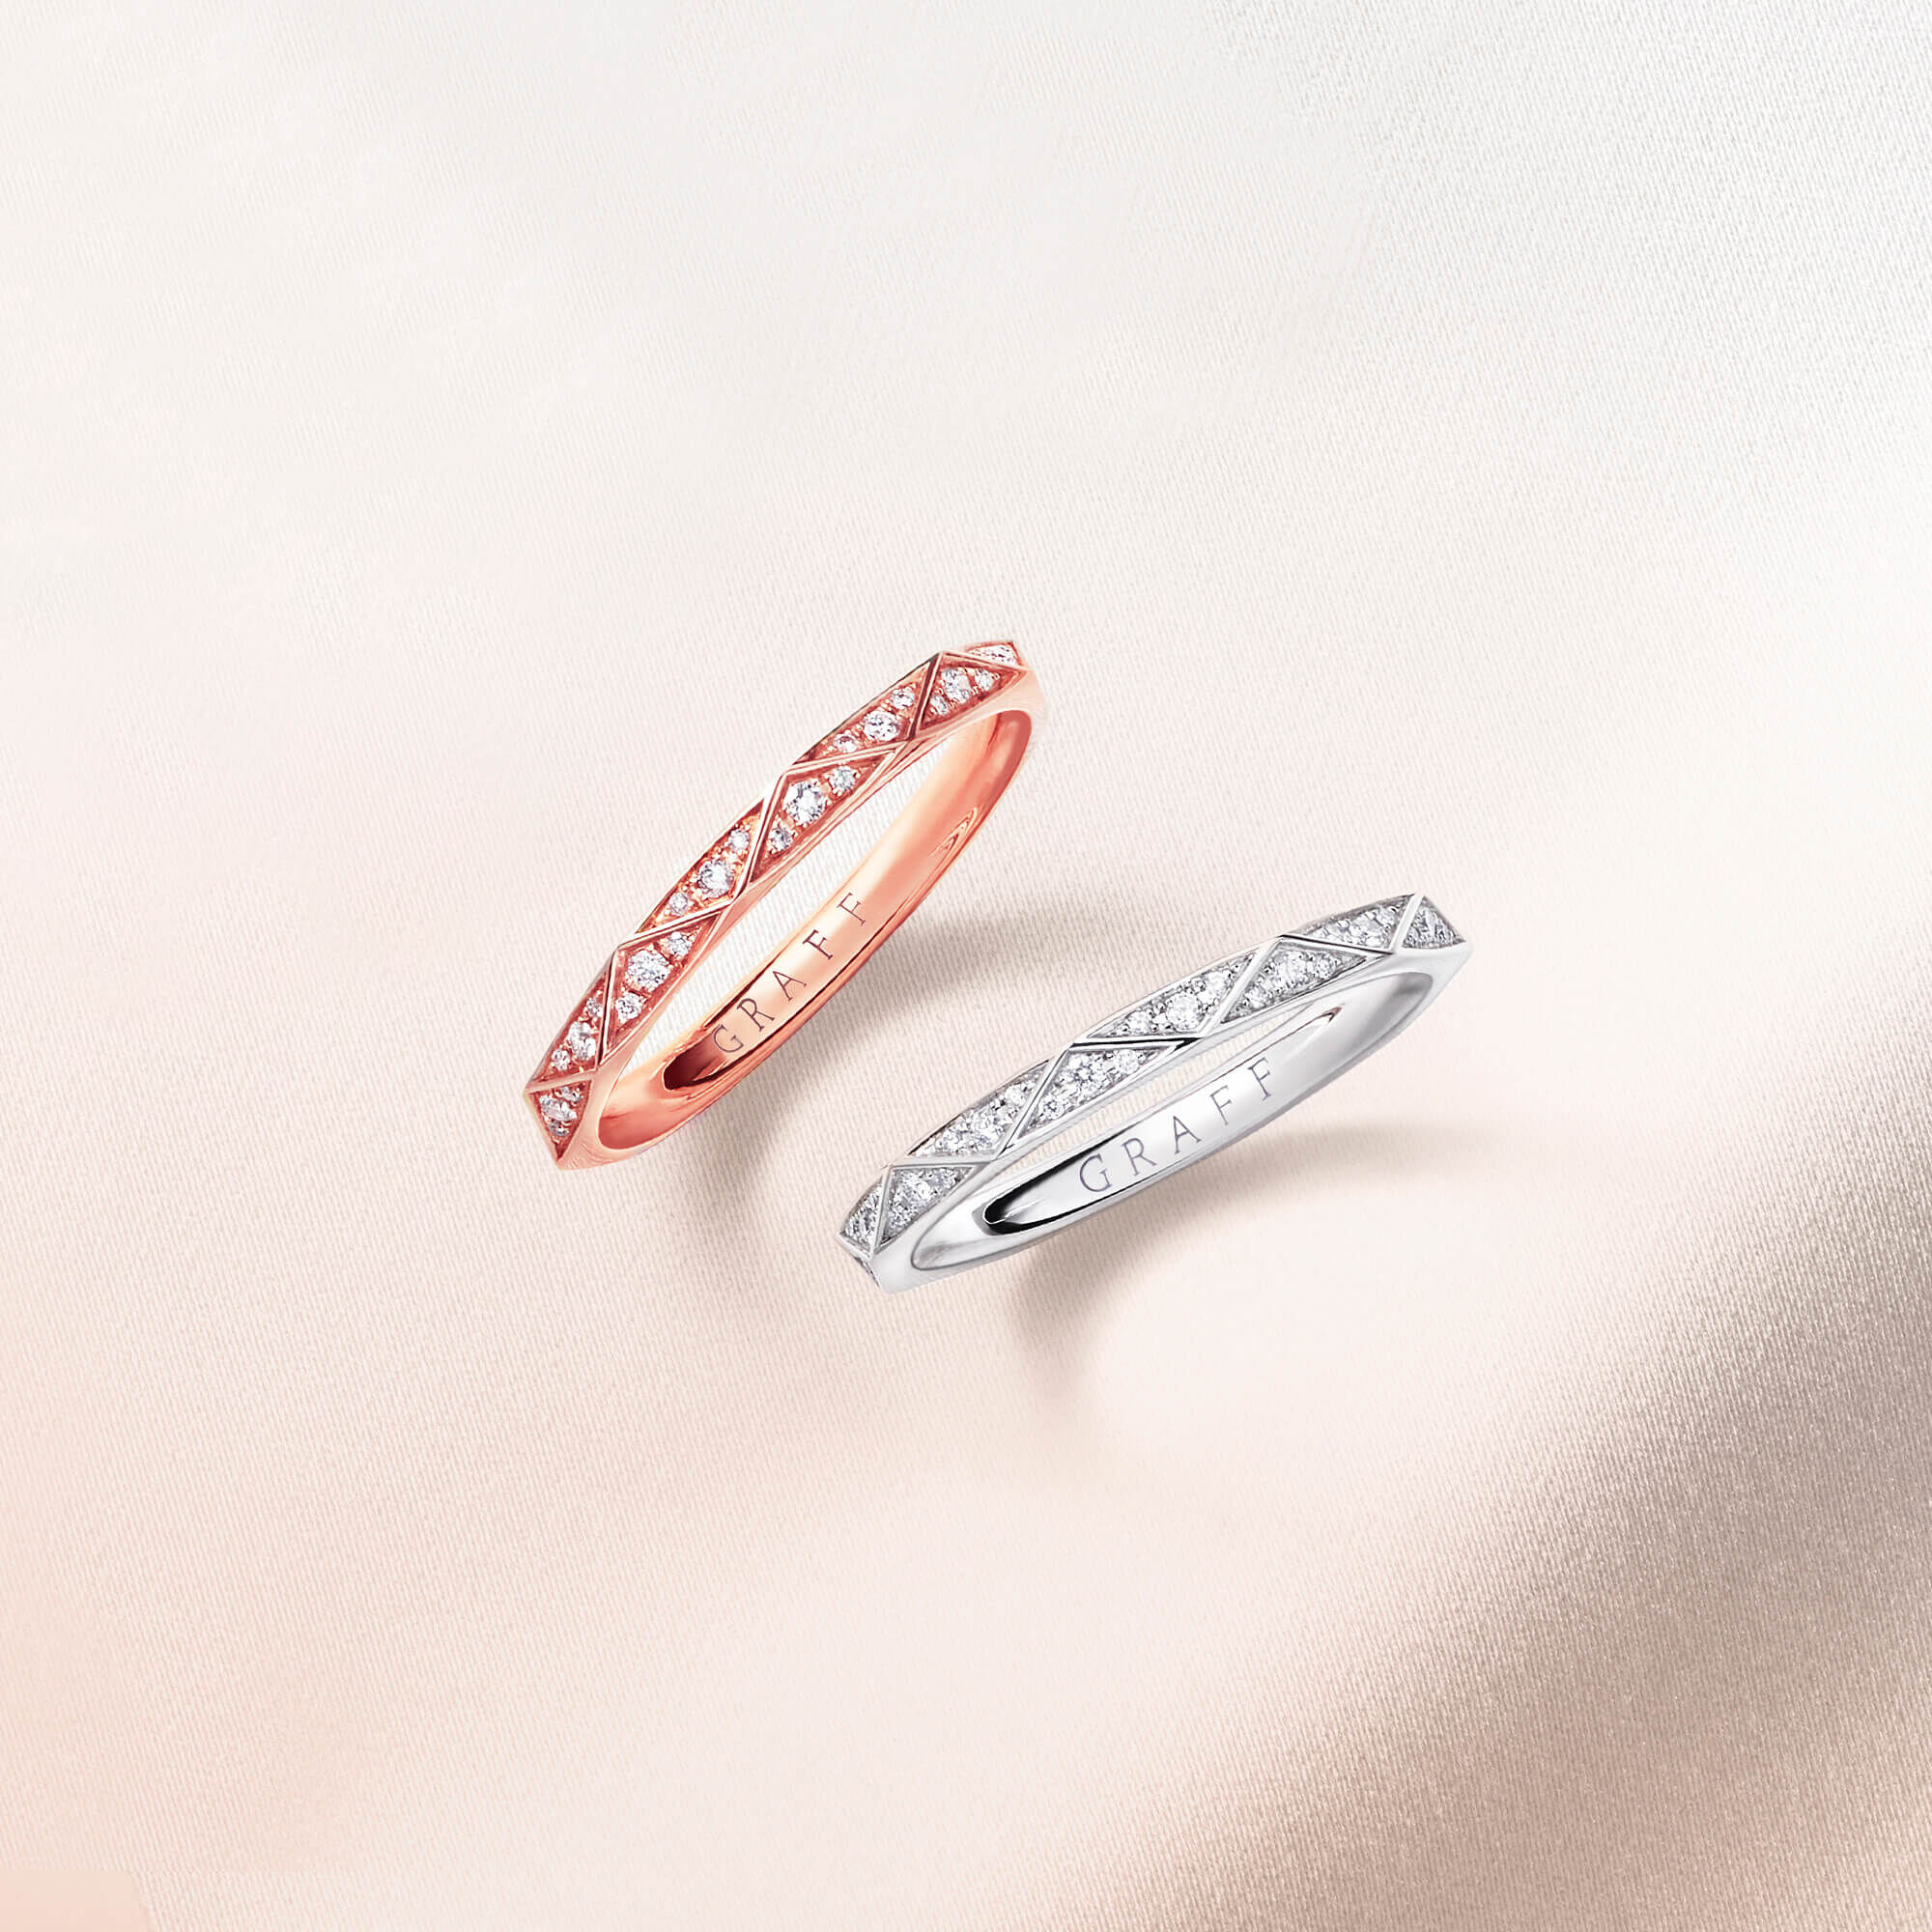 Laurence Graff Signature Diamond Band white gold and  Laurence Graff Signature Diamond Band rose gold from the Graff bridal collection